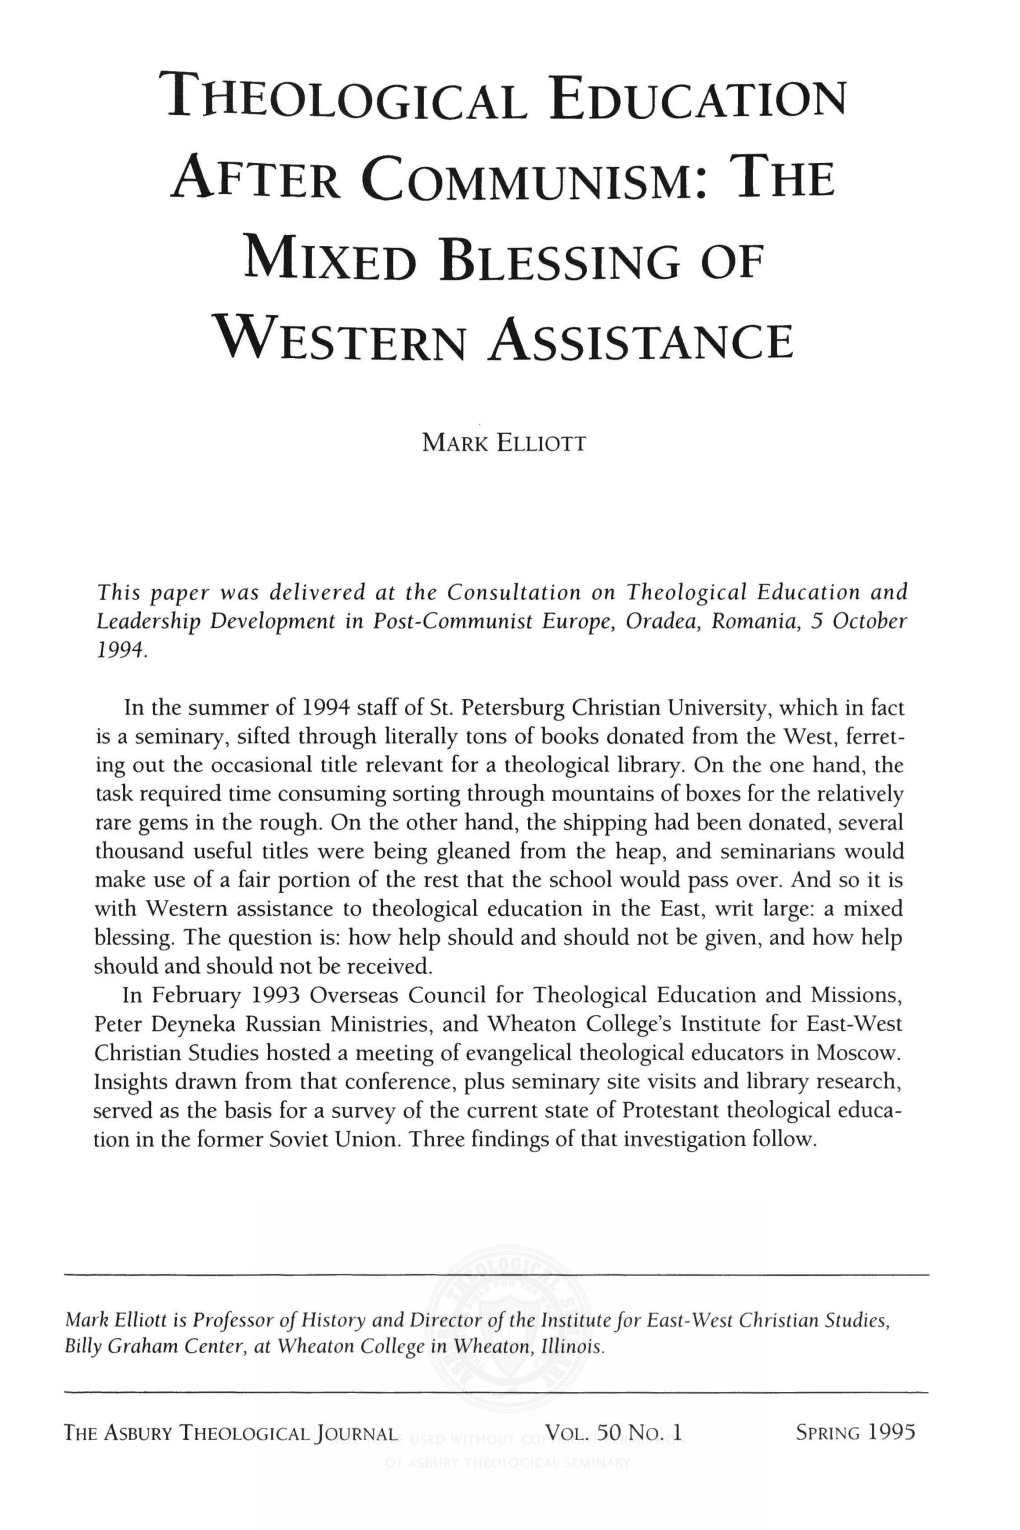 Theological Education After Communism: the Mixed Blessing of Western Assistance